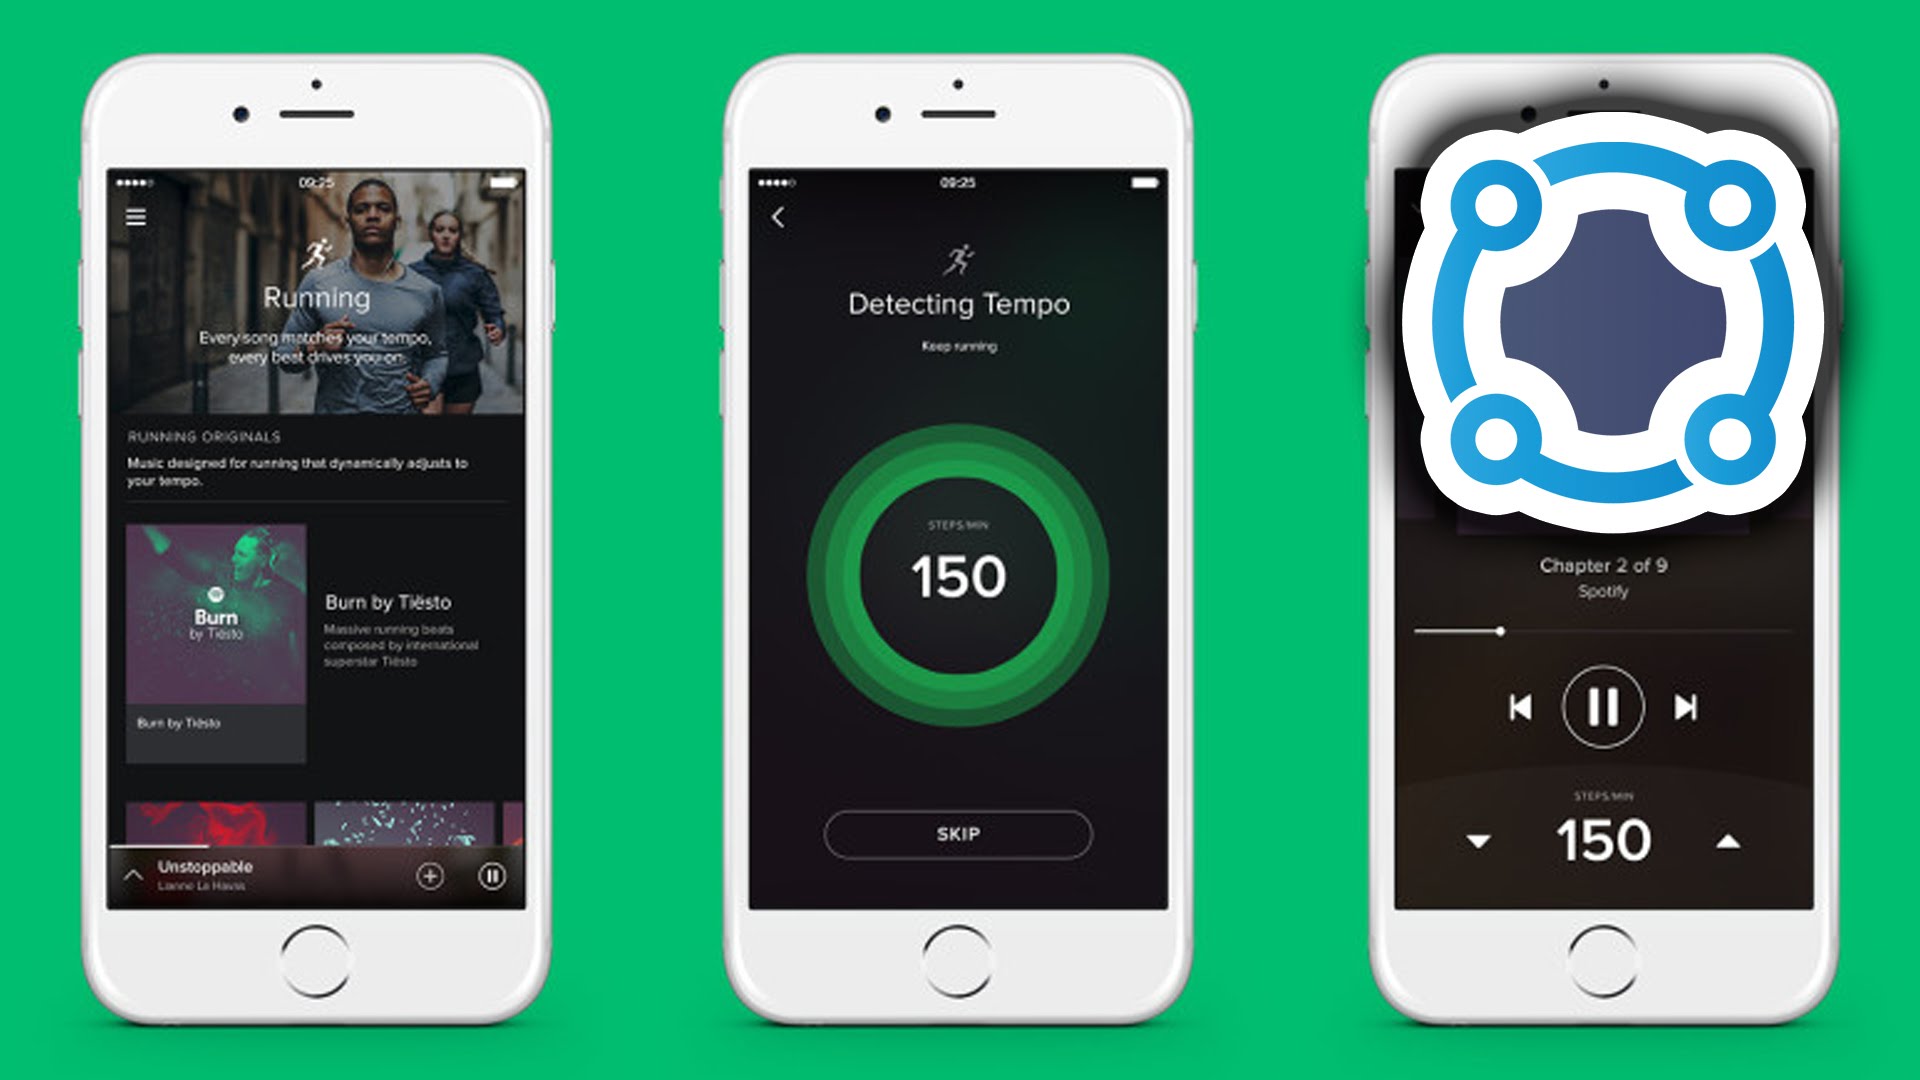 Spotify Gets Video Streaming And Running Features